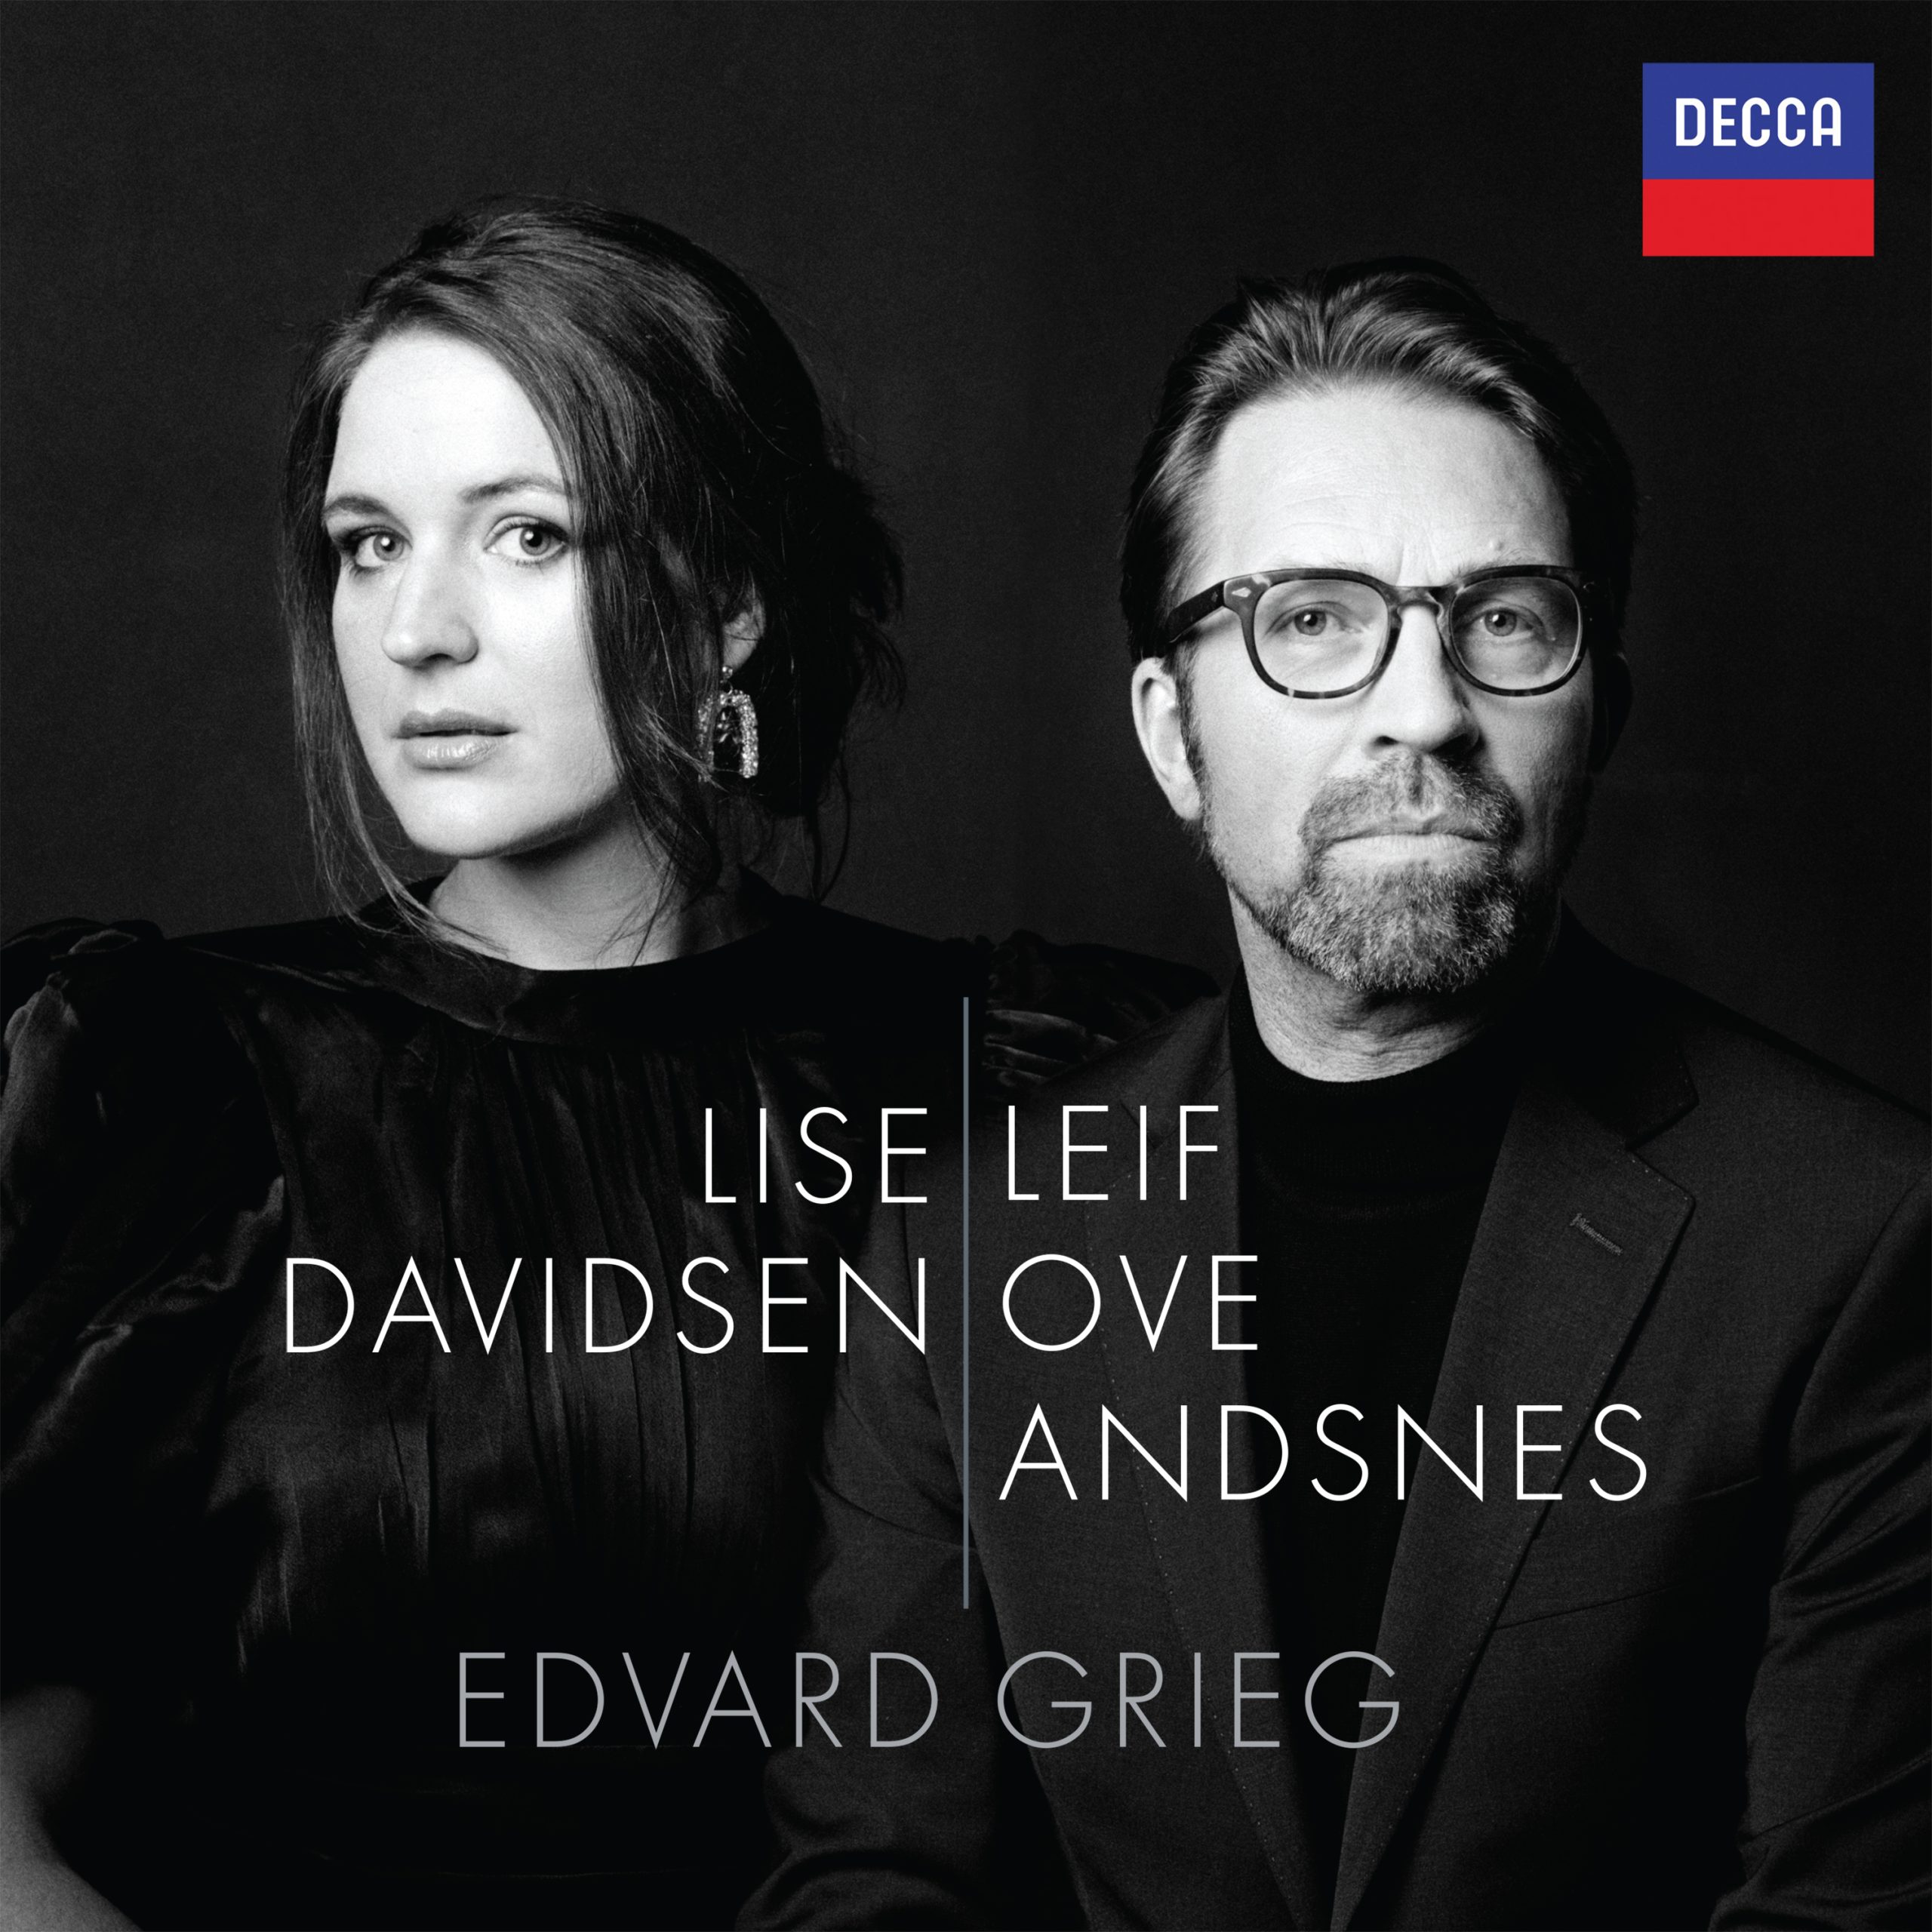 New Album Of Edvard Grieg Songs Coming Soon